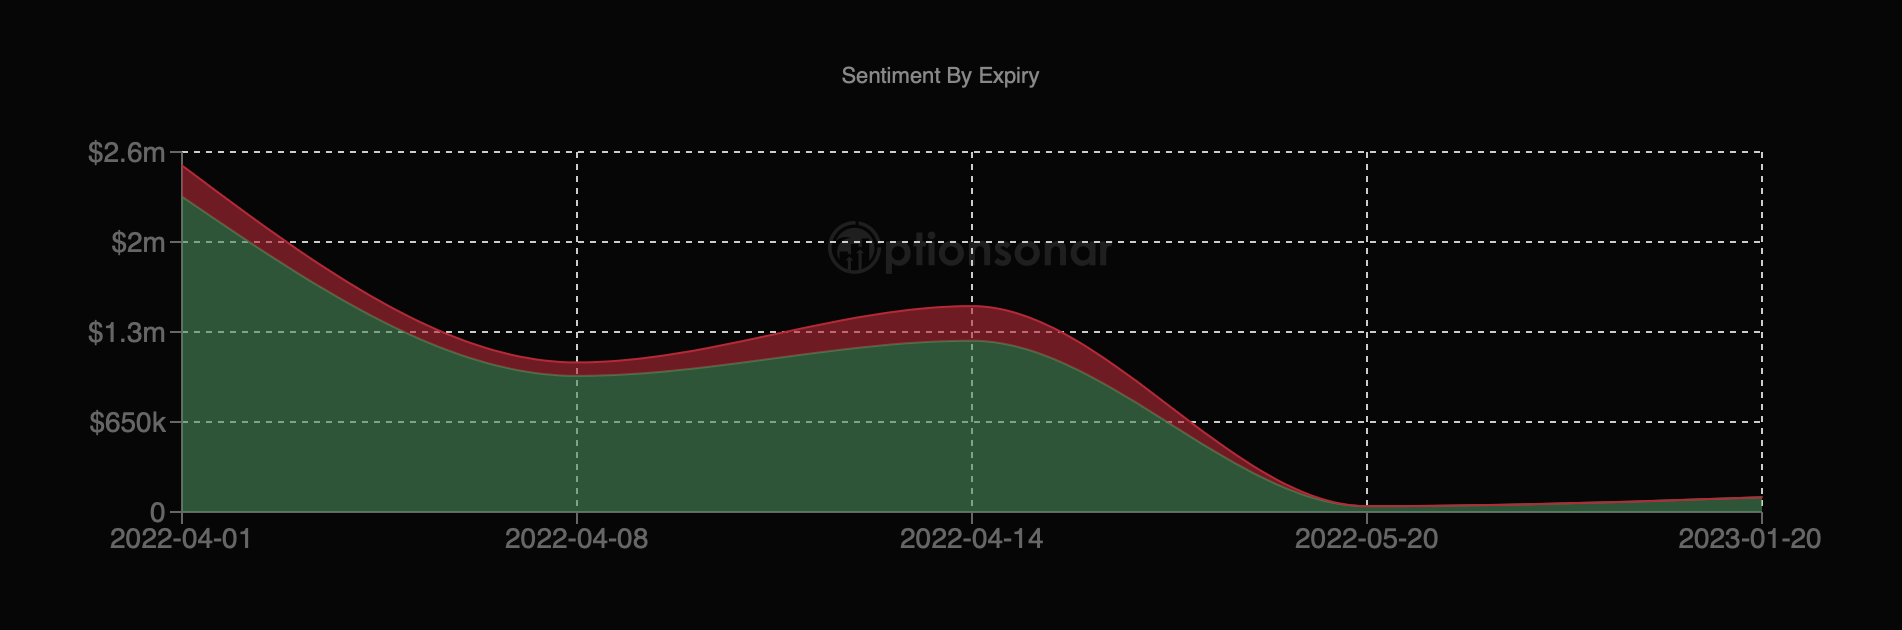 GME stock option sentiment by expiry